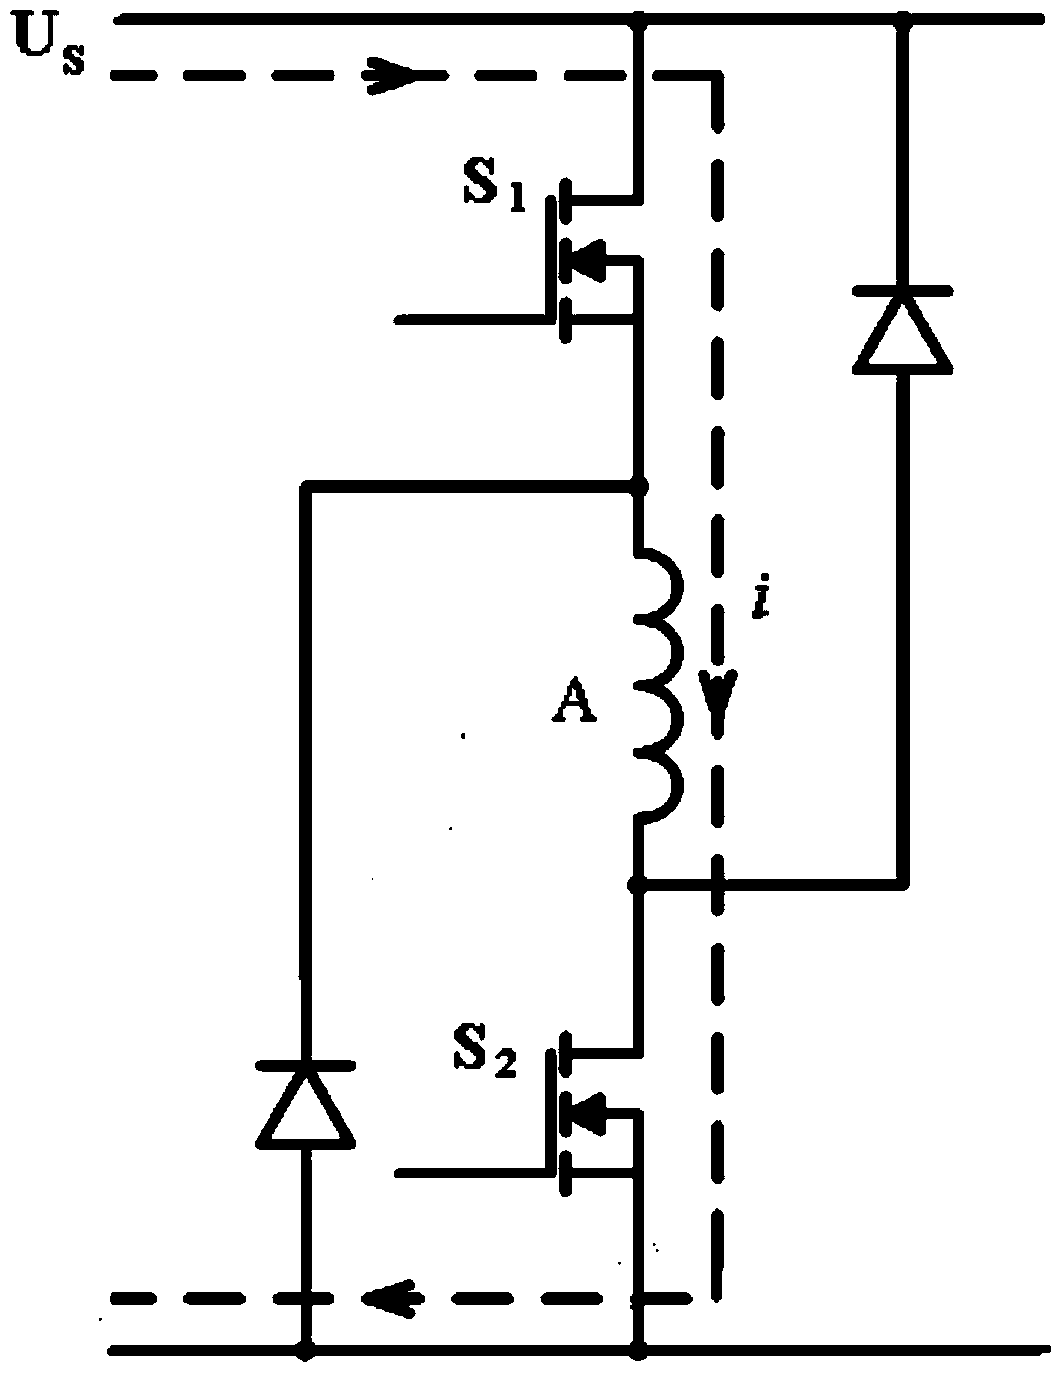 Switch reluctance motor rotor-less position sensor control method